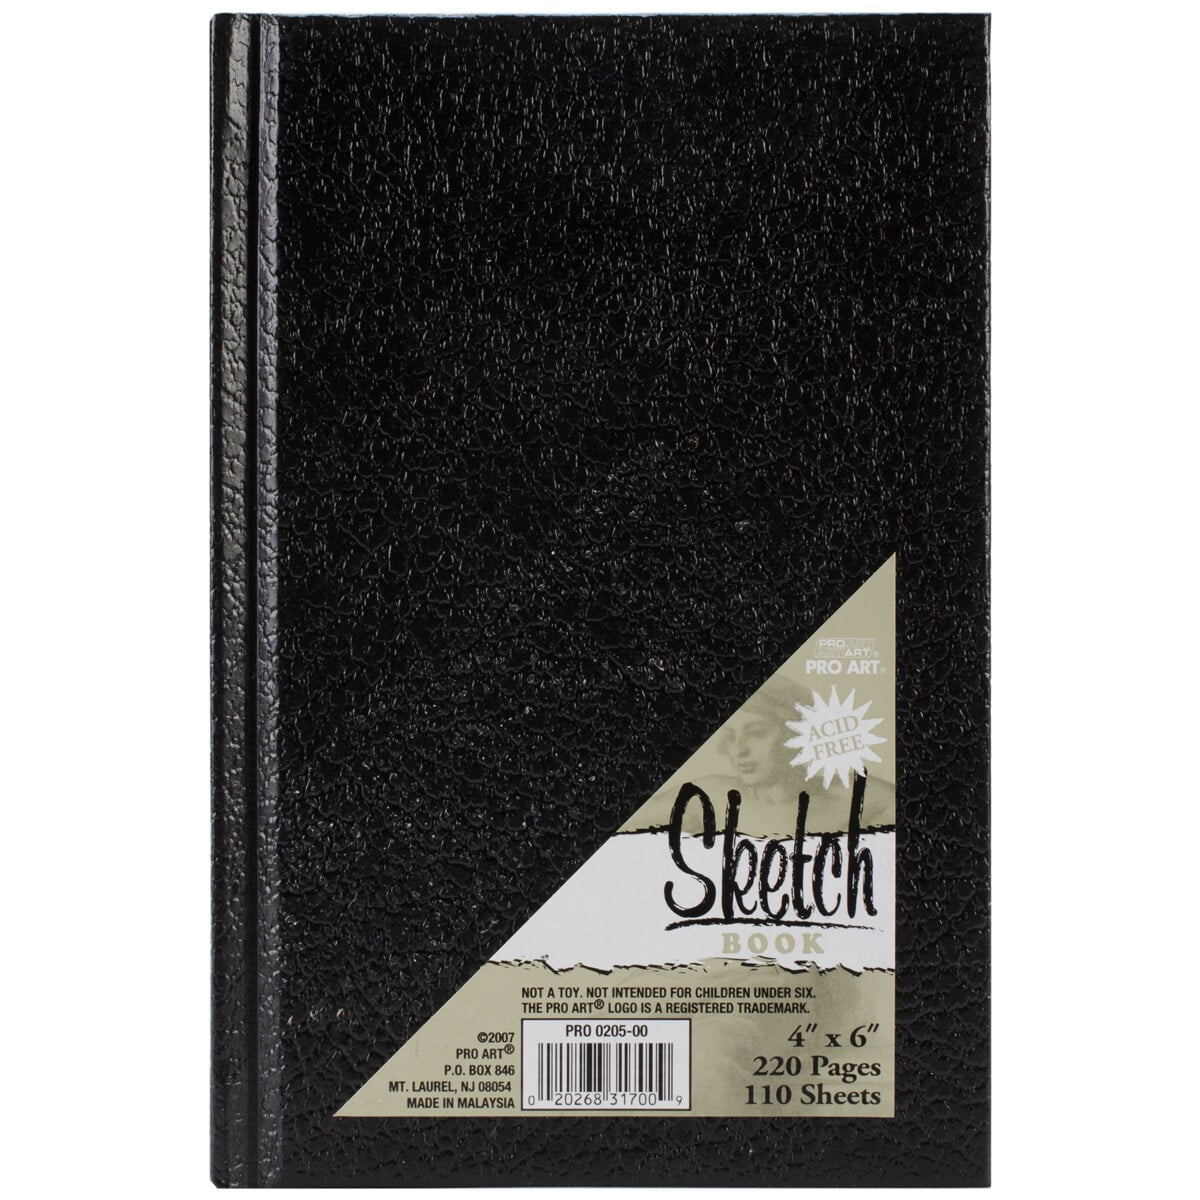 Pro Art Hardbound Sketchbook: 4 X 6 inches, 220 pages 